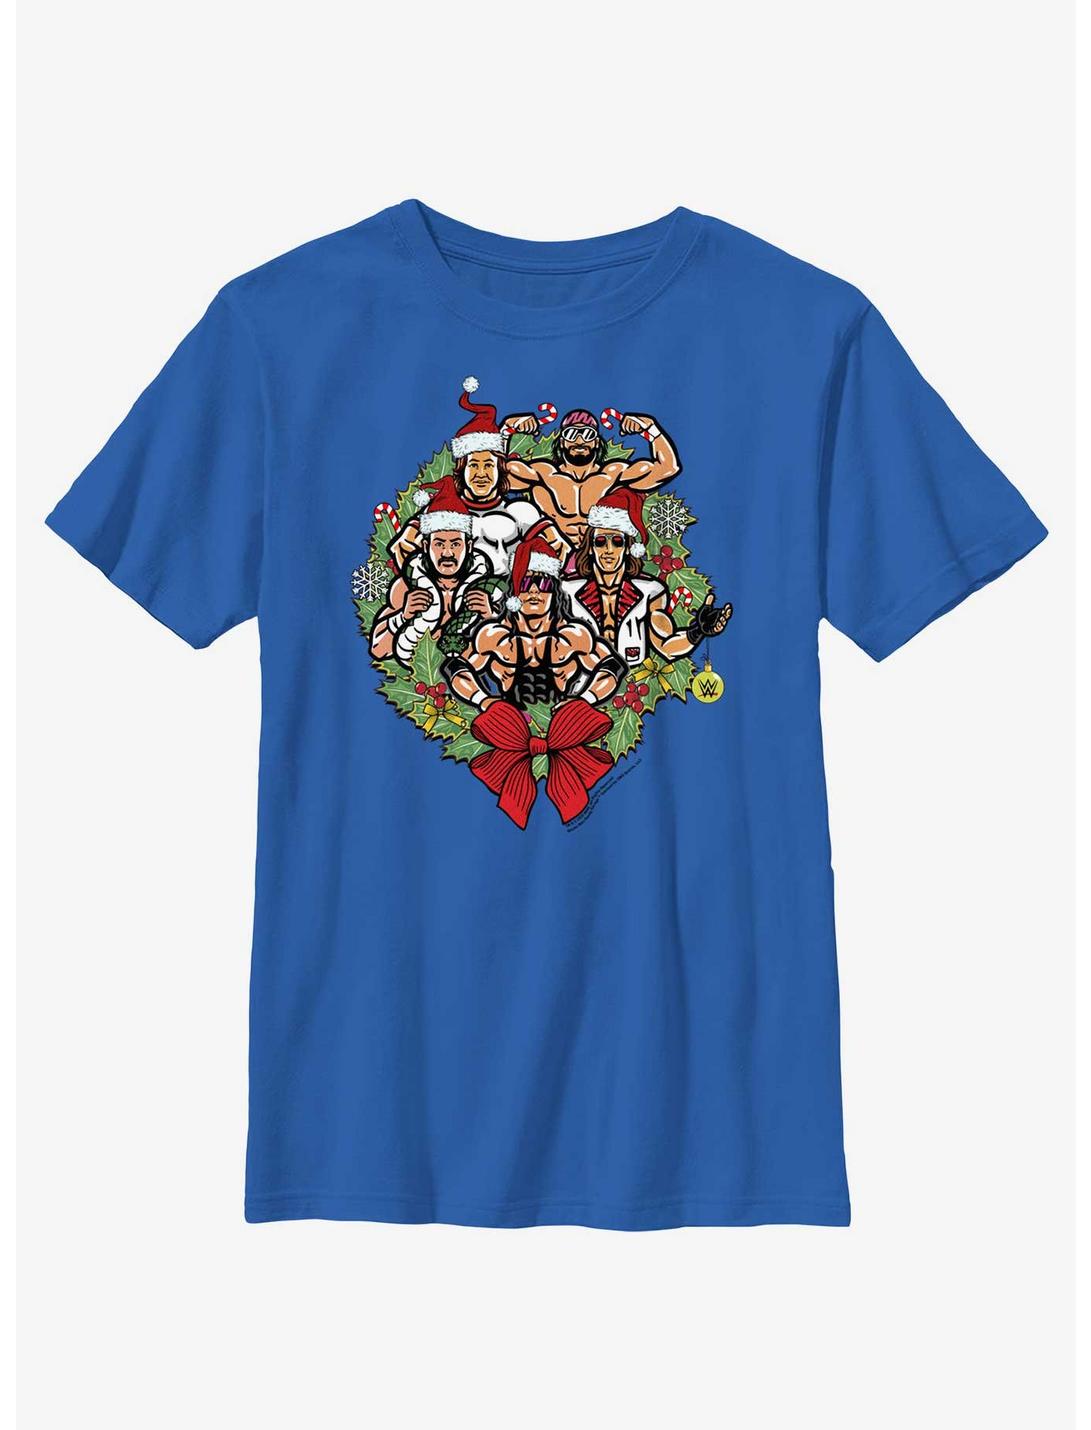 WWE Holiday Legends Wreath Youth T-Shirt, ROYAL, hi-res